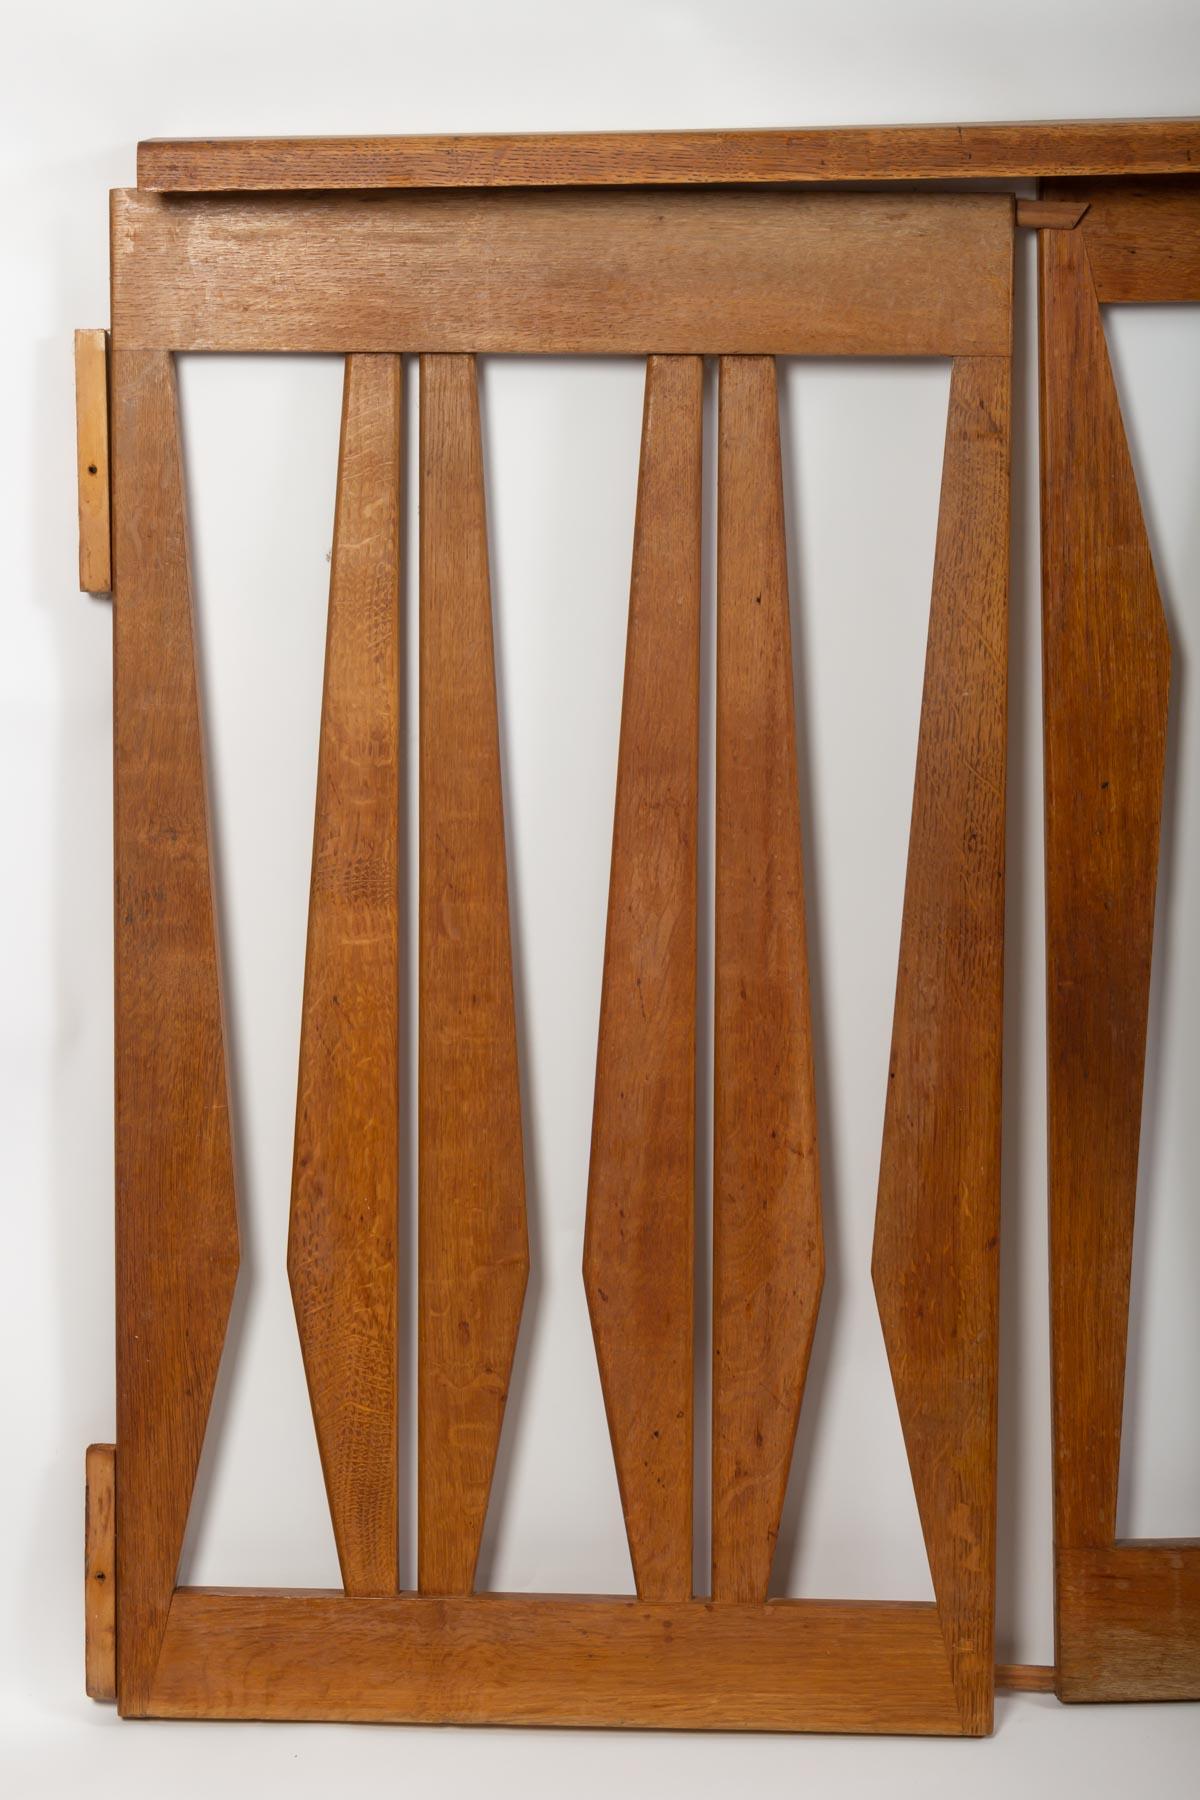 Balustrade of Guillerme and Chambron, 1960, composed of 7 elements forming an L

Measures: 7x (W: 55cm, H: 96cm, D: 8cm)